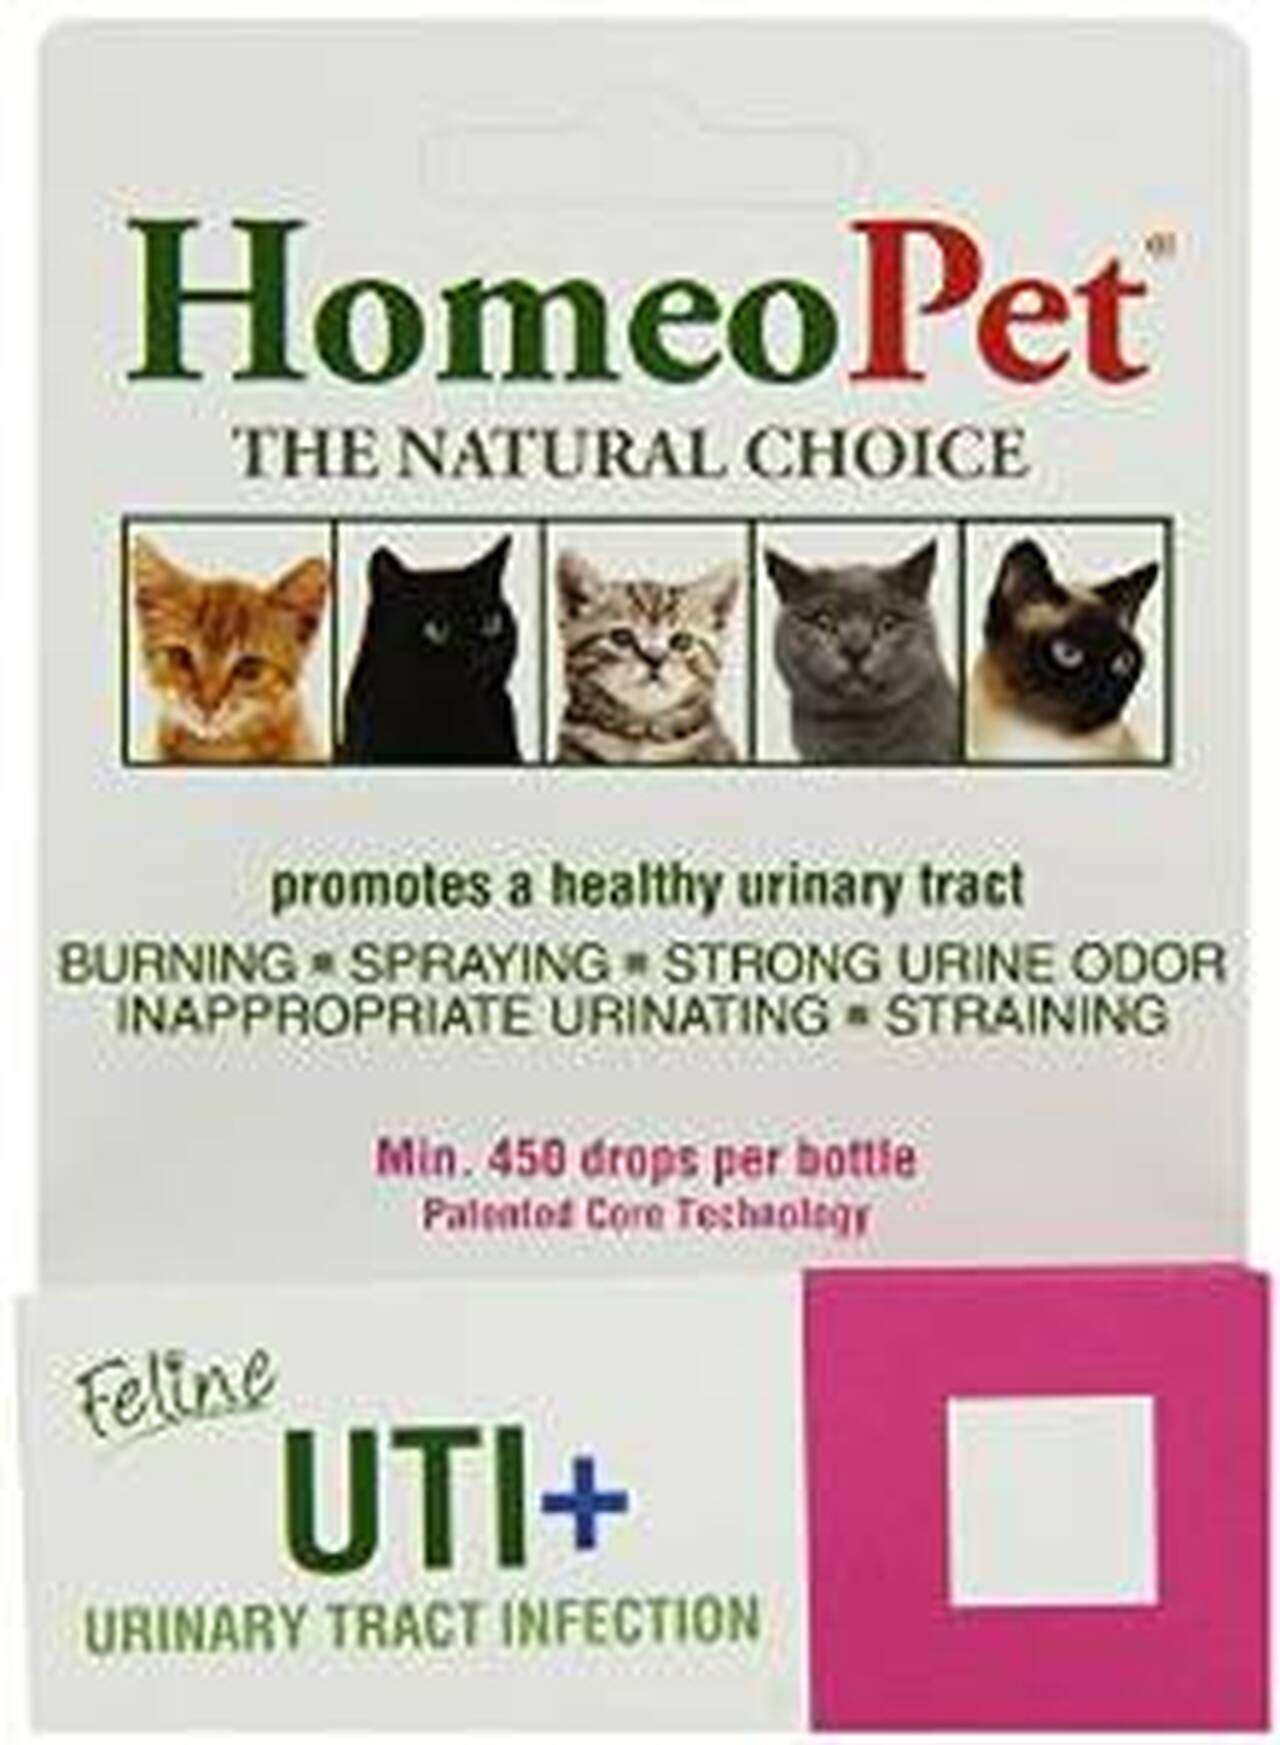 Homeopet UTI Plus Urinary Tract Infection for Cats, 15ml ...